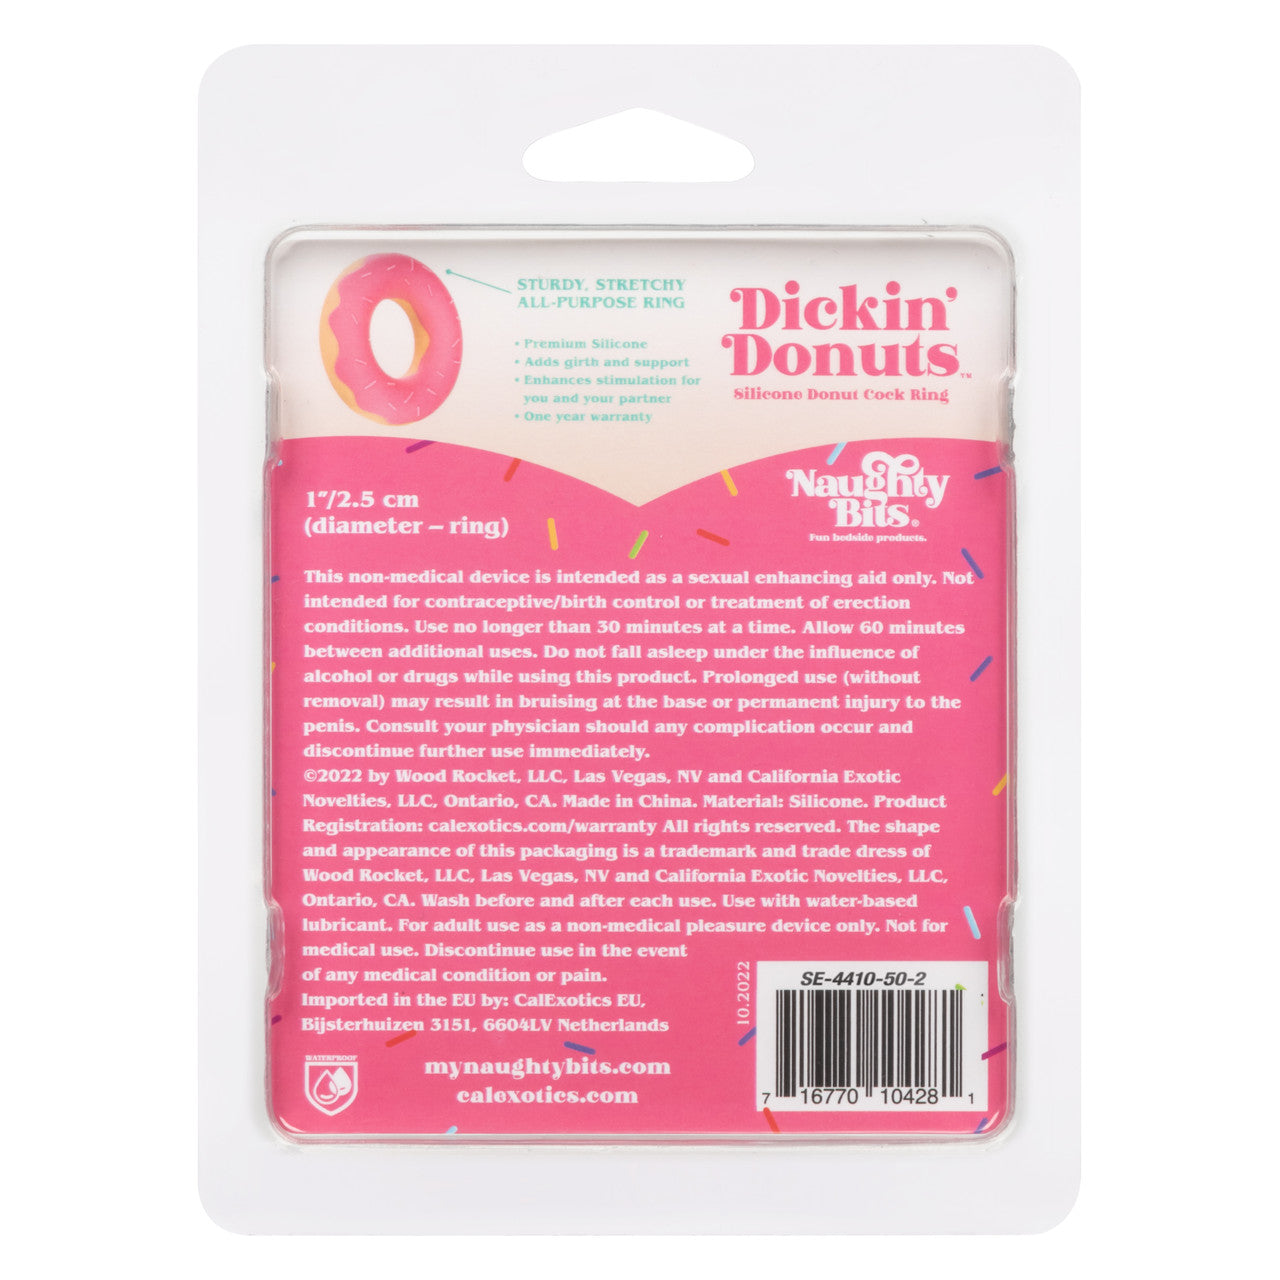 The back of the packaging for the Dickin Donuts Silicone Cock Ring.